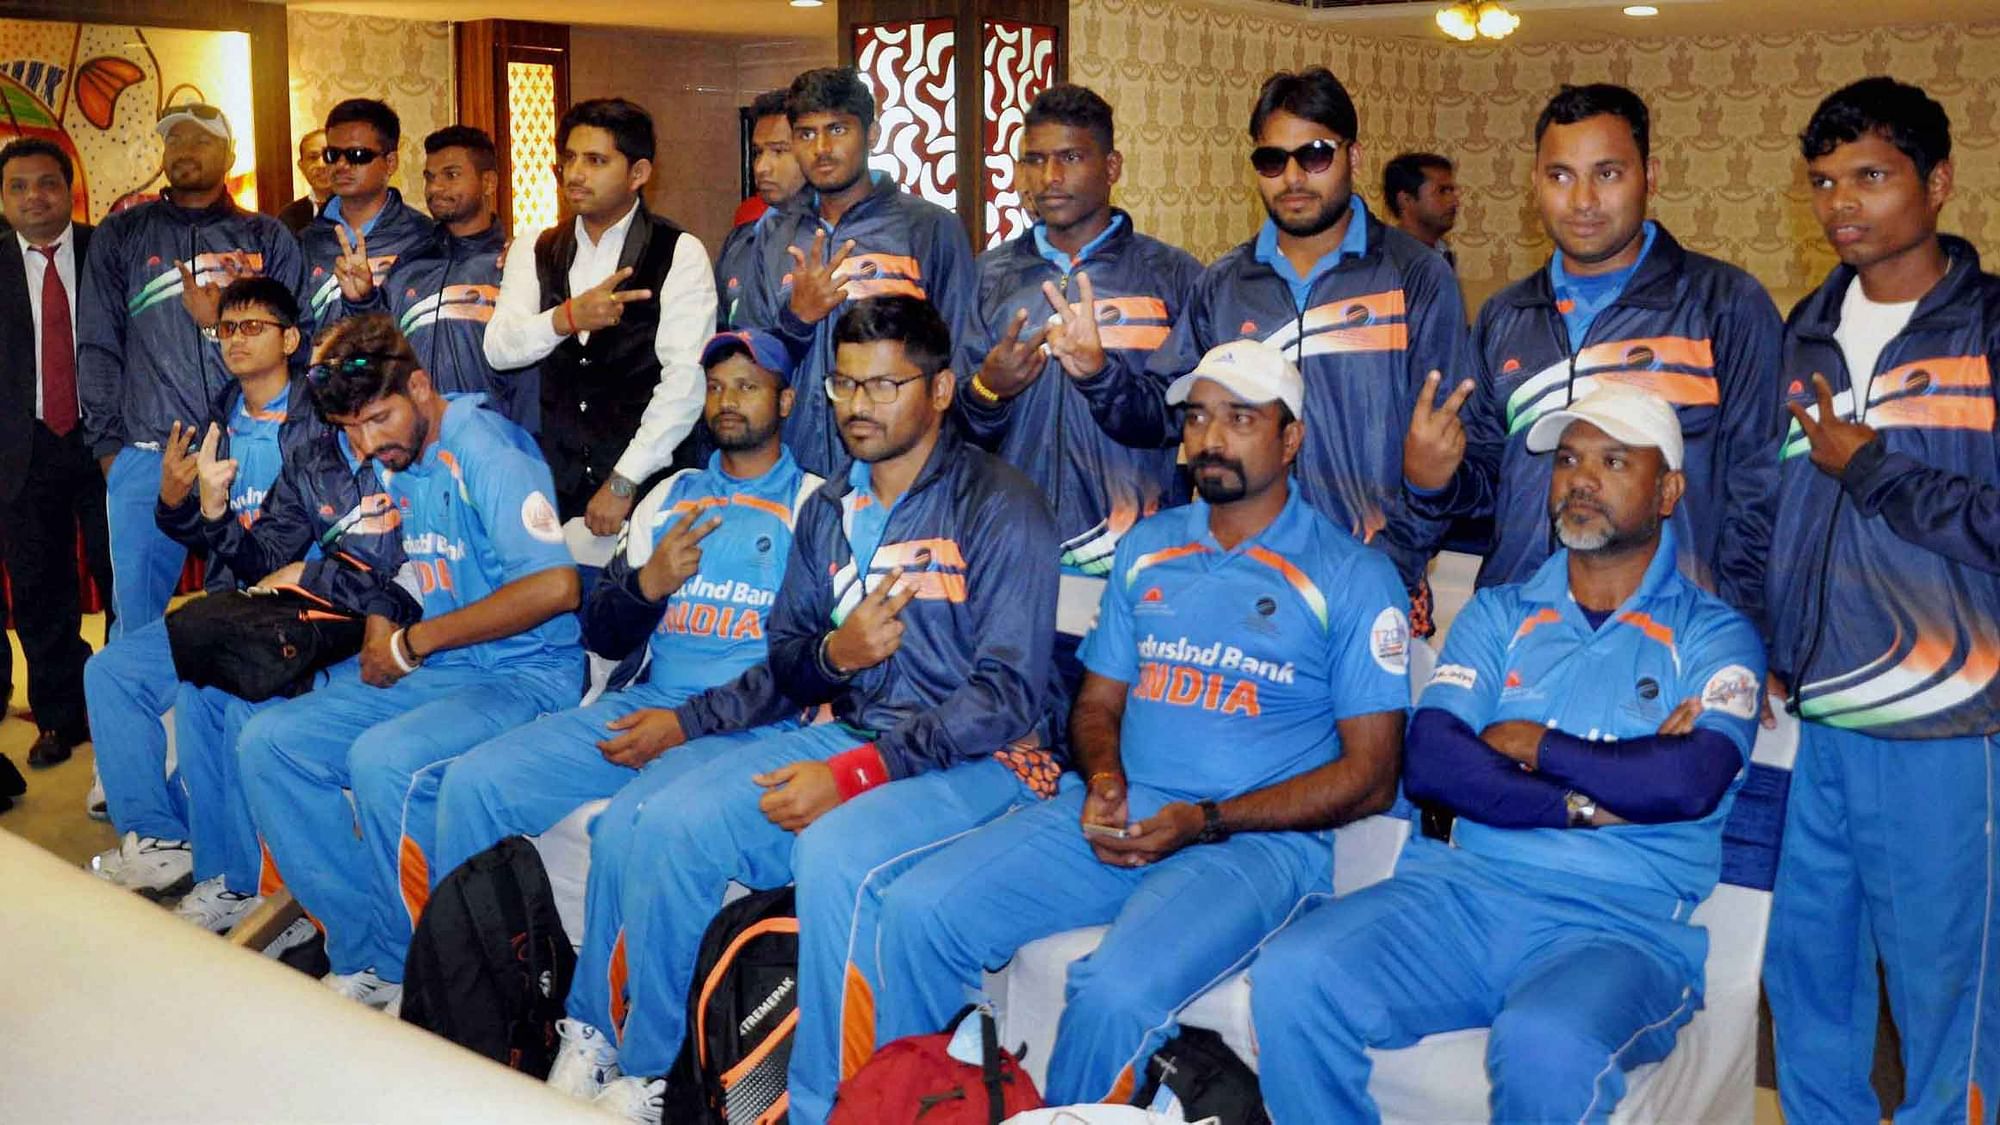 India’s ‘blind cricket’ team is currently playing the T20 World Cup. (Photo: IANS)